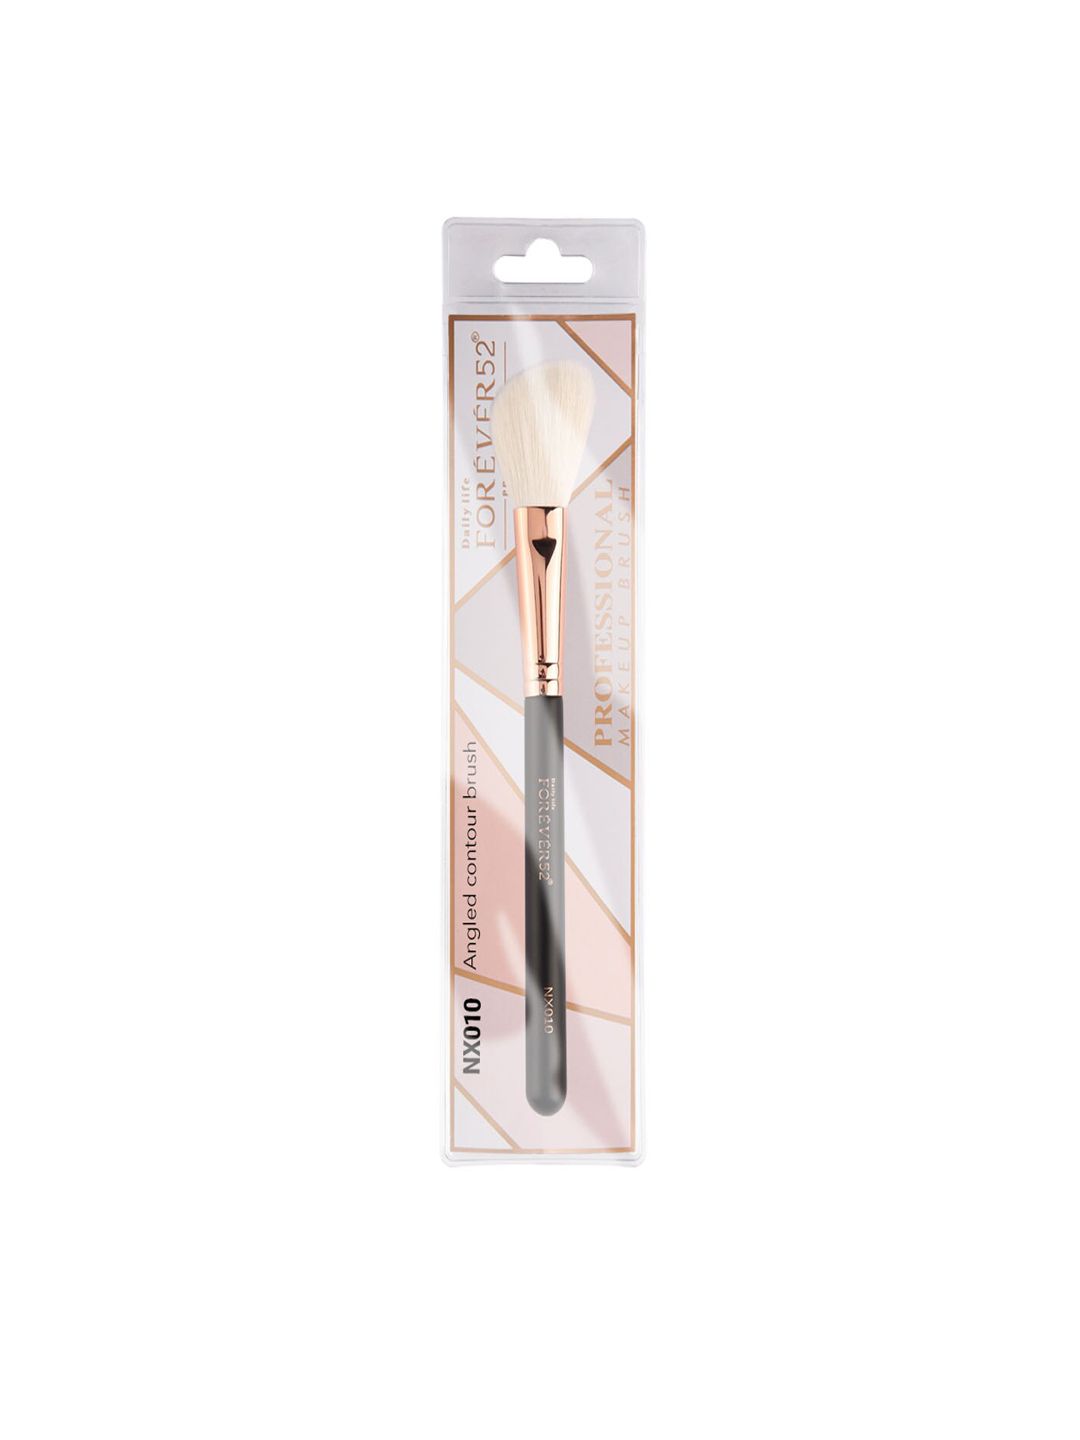 Daily Life Forever52 Angled Contour brush NX010 Price in India